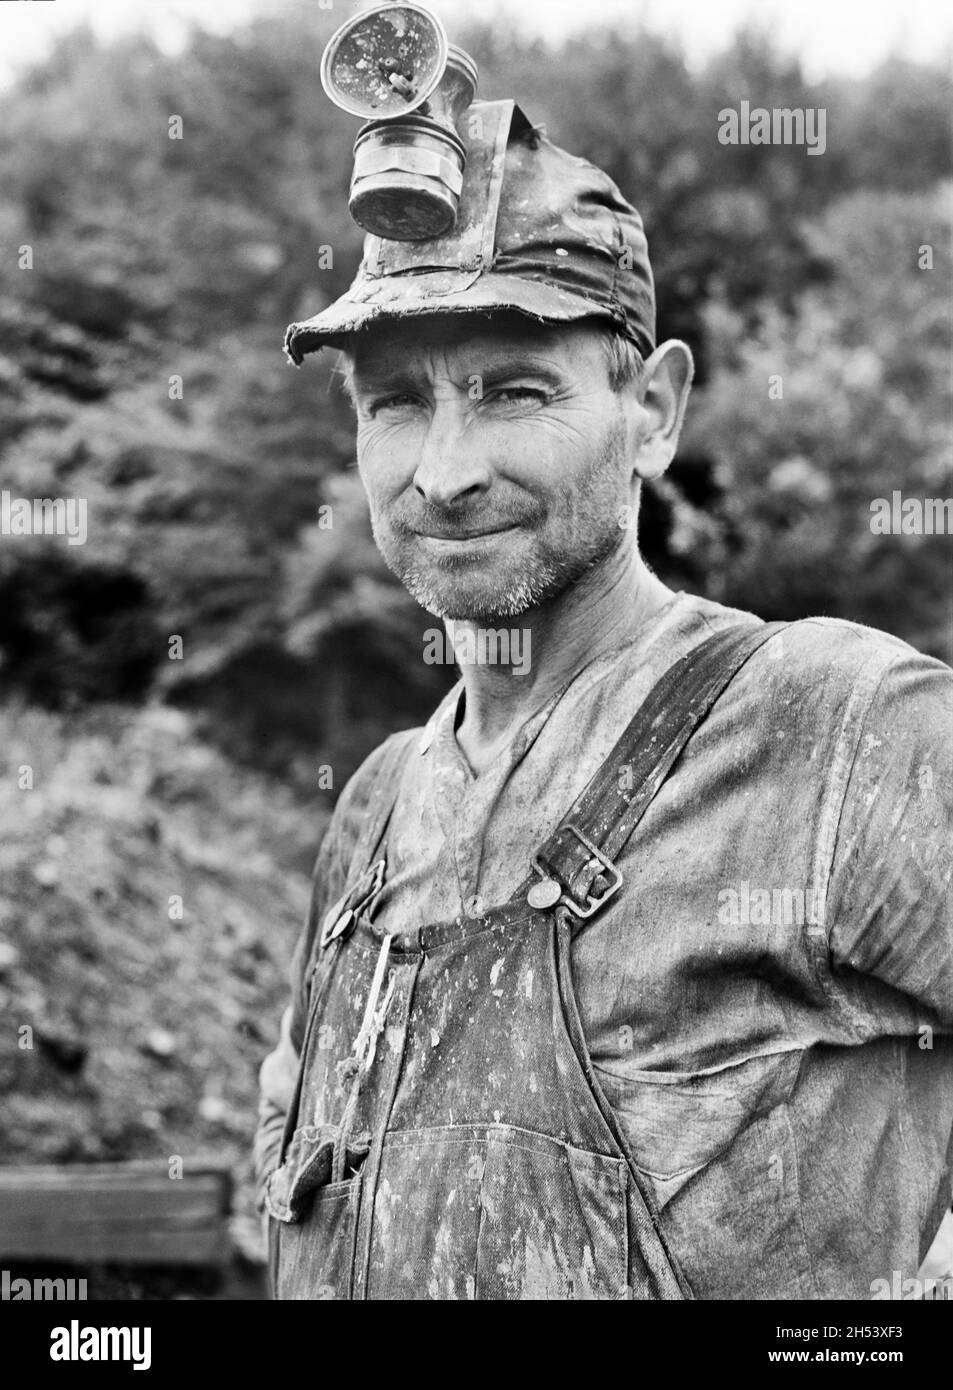 William Giles, Miner-Farmer, head and shoulders Portrait, Union Township, Pennsylvania, USA, Jack Delano, U.S. Farm Security Administration, U.S. Office of War Information Photograph Collection, August 1940 Stock Photo